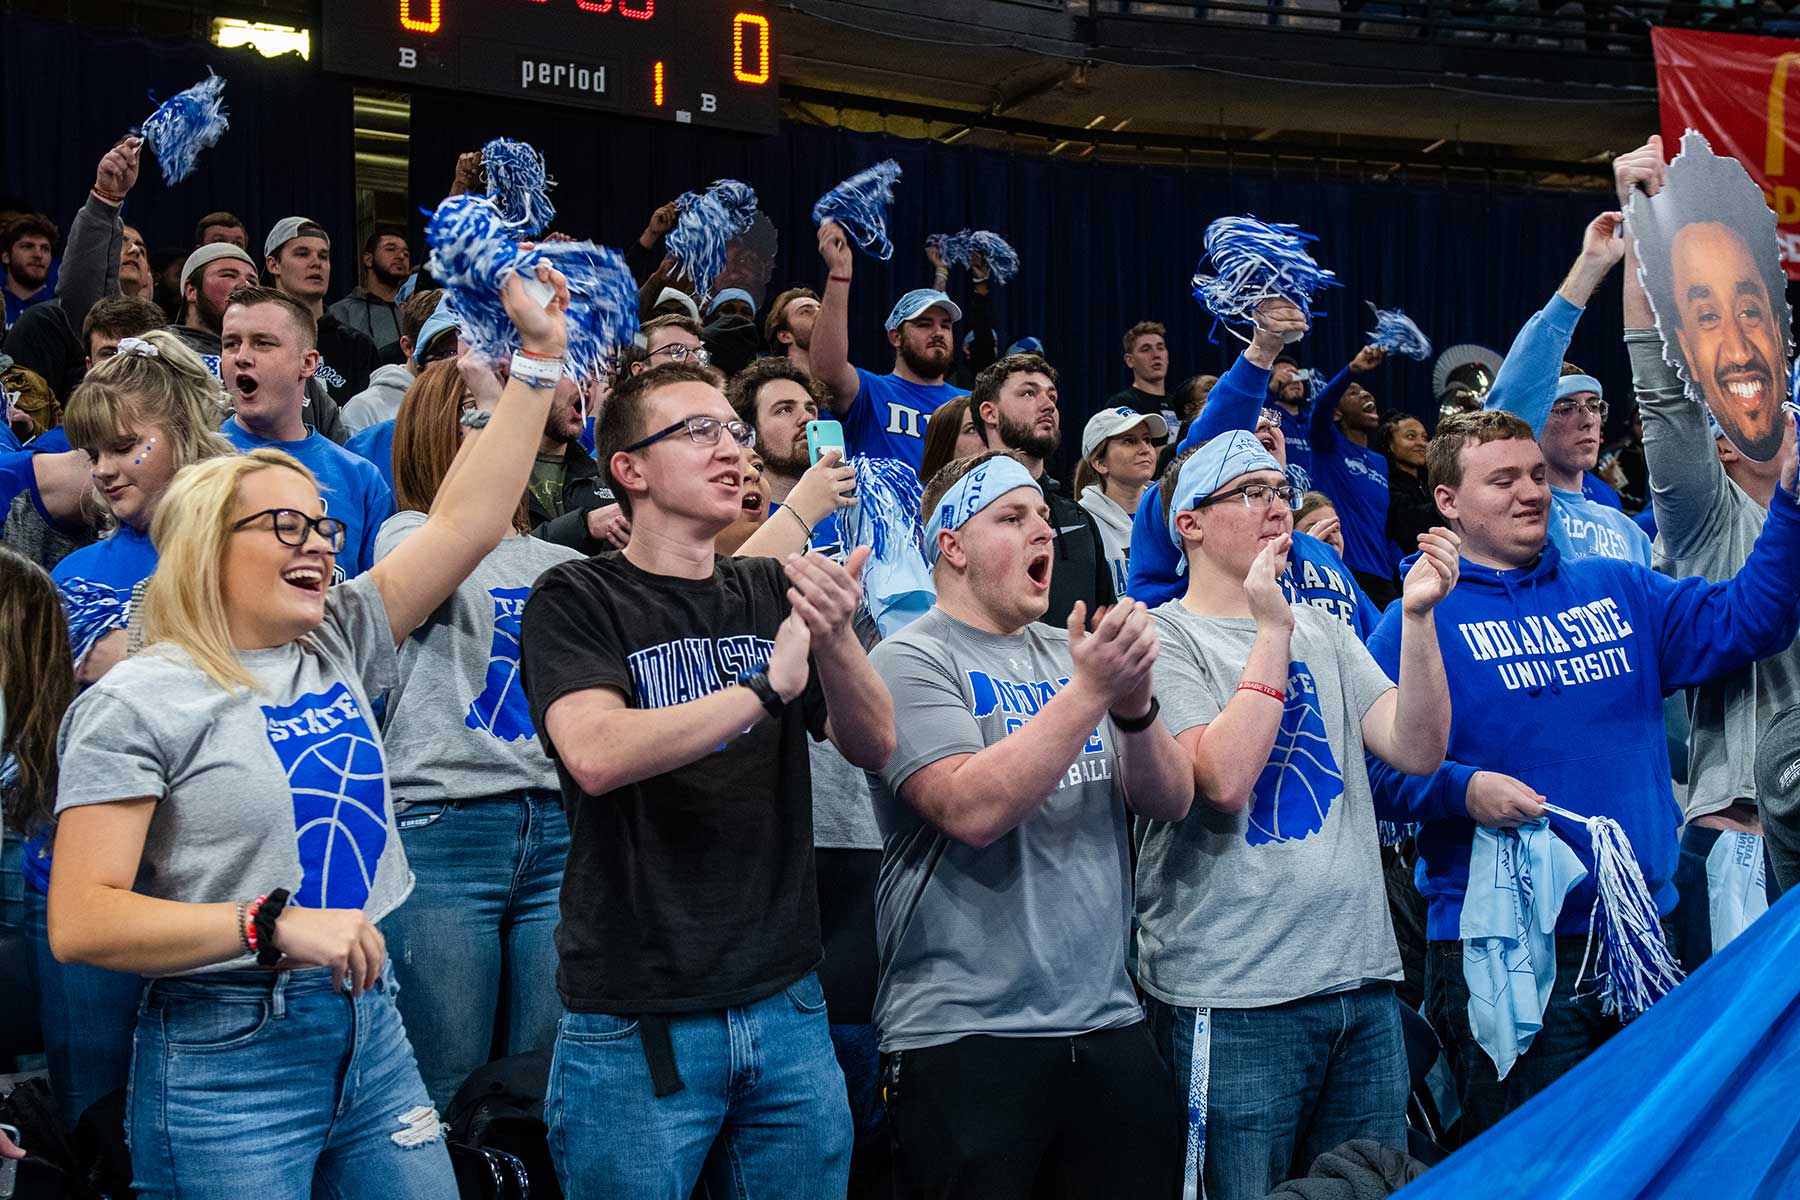 A large group of Sycamore fans, men and women, cheer for their team during a basketball game at the Hulman Center. They are clapping, cheering, holding blue and white mini-pompoms, and many are wearing light blue headbands. 